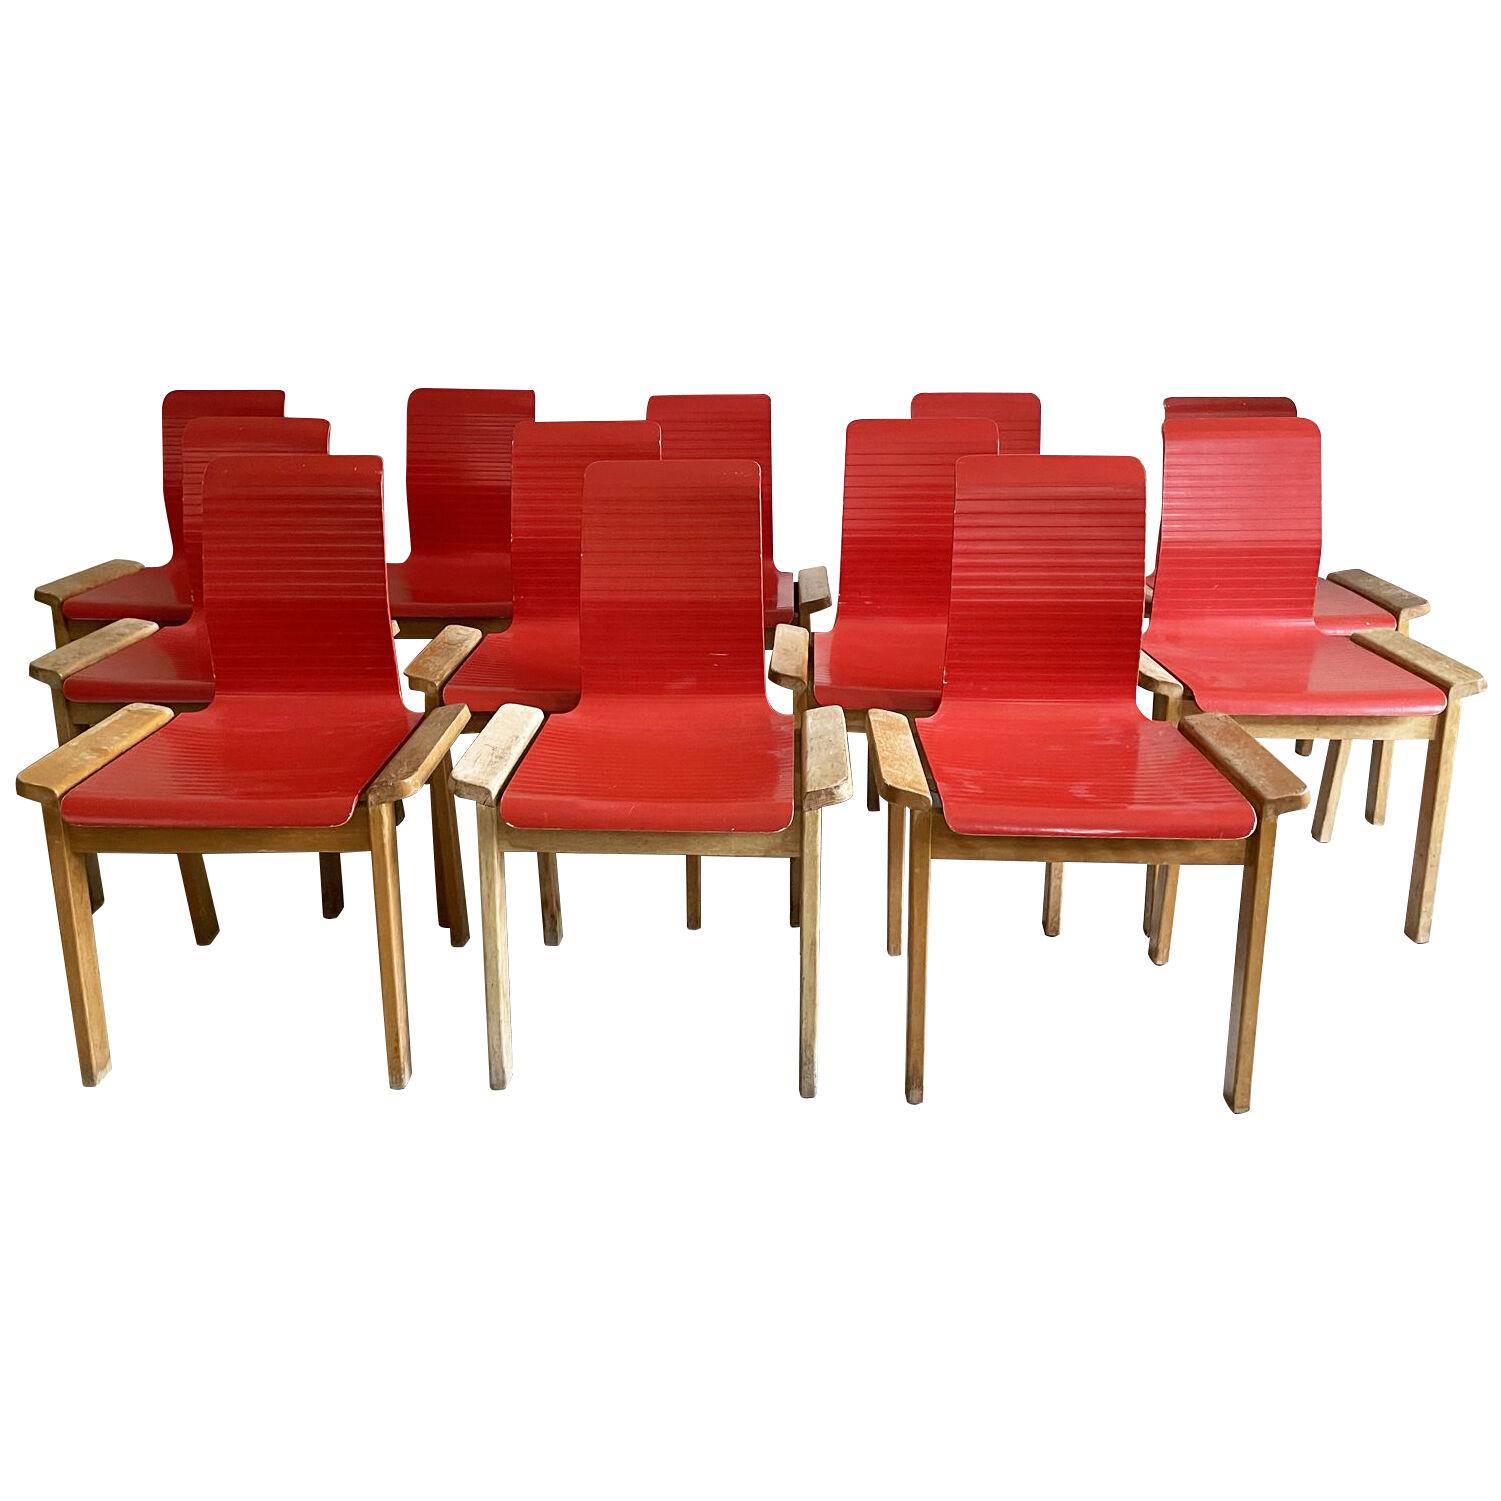 A Set of 12 1960's French Red Lacquer and Beech Dining Chairs